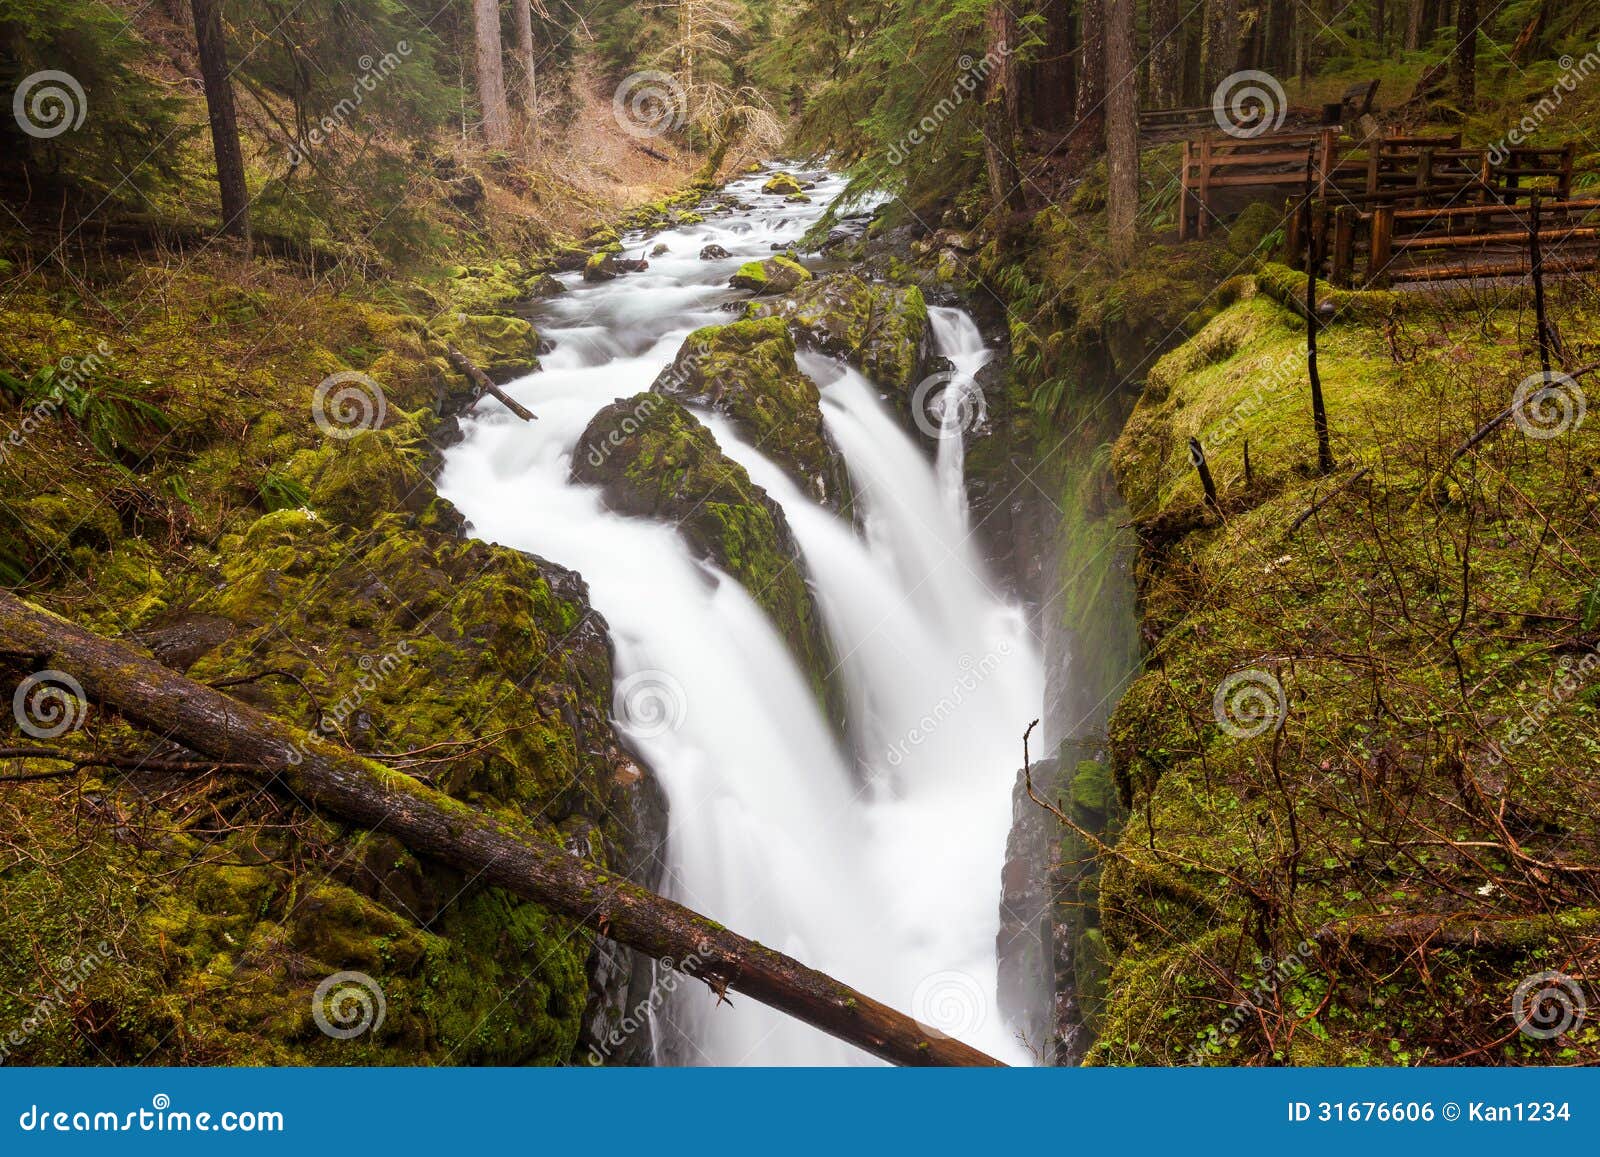 sol duc falls, olympic national park